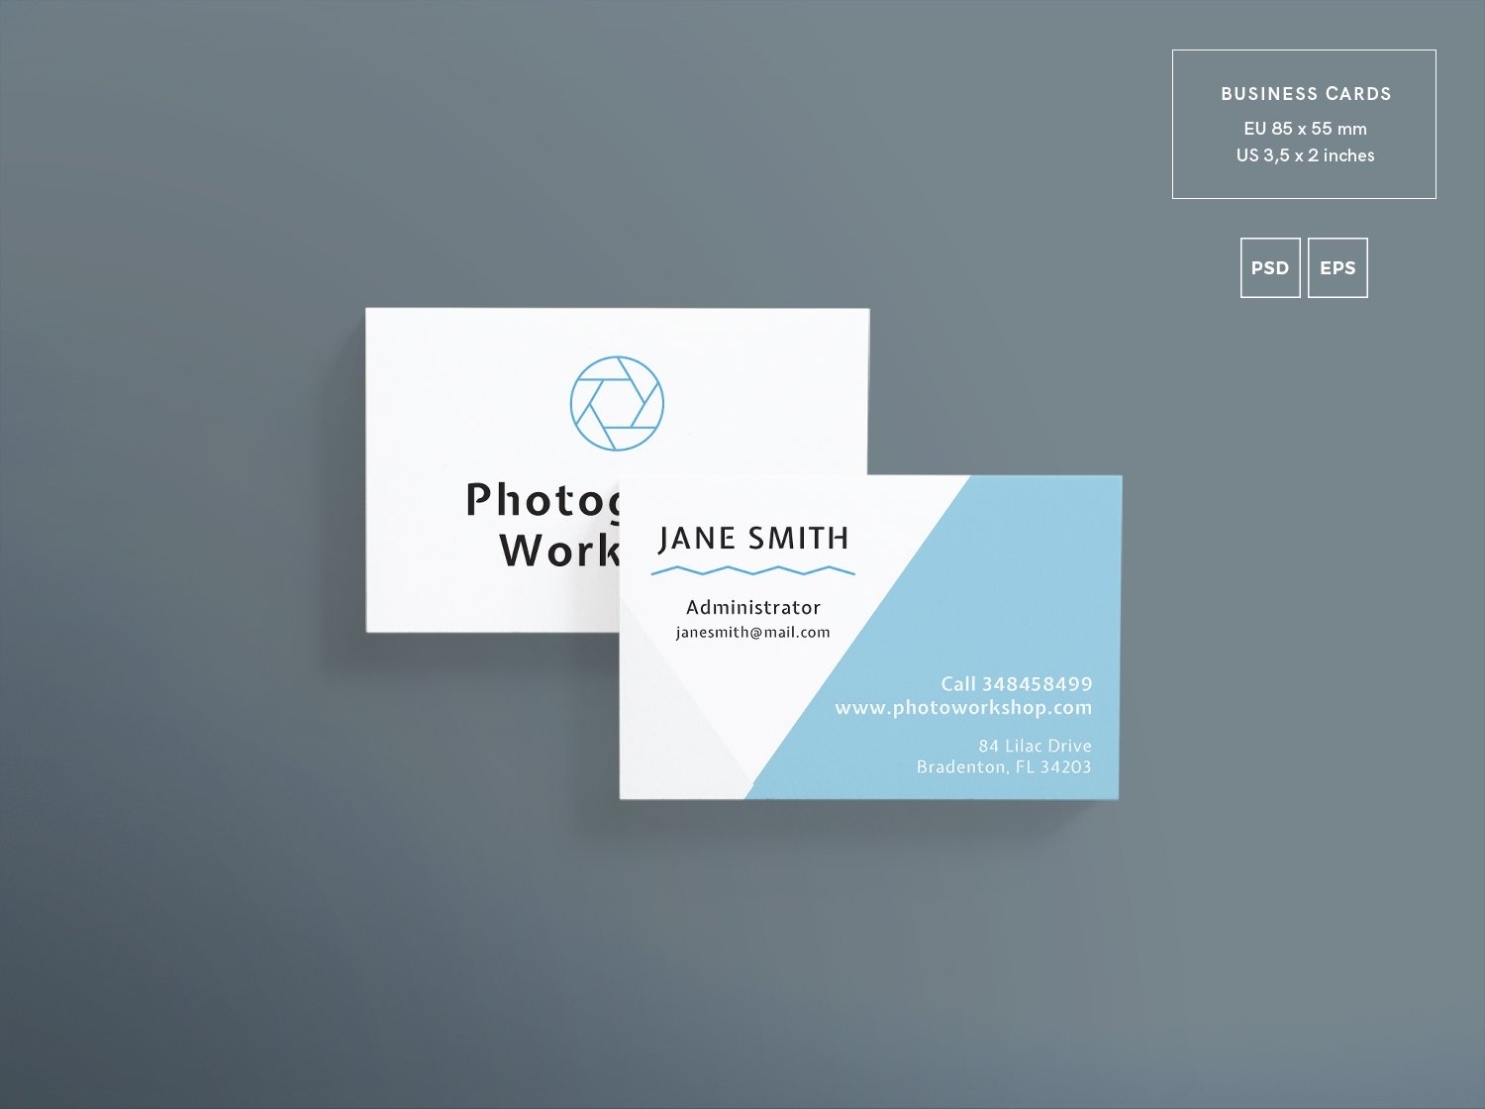 Photography Workshop Business Card Free Psd Template – Stockpsd Regarding Free Business Card Templates For Photographers